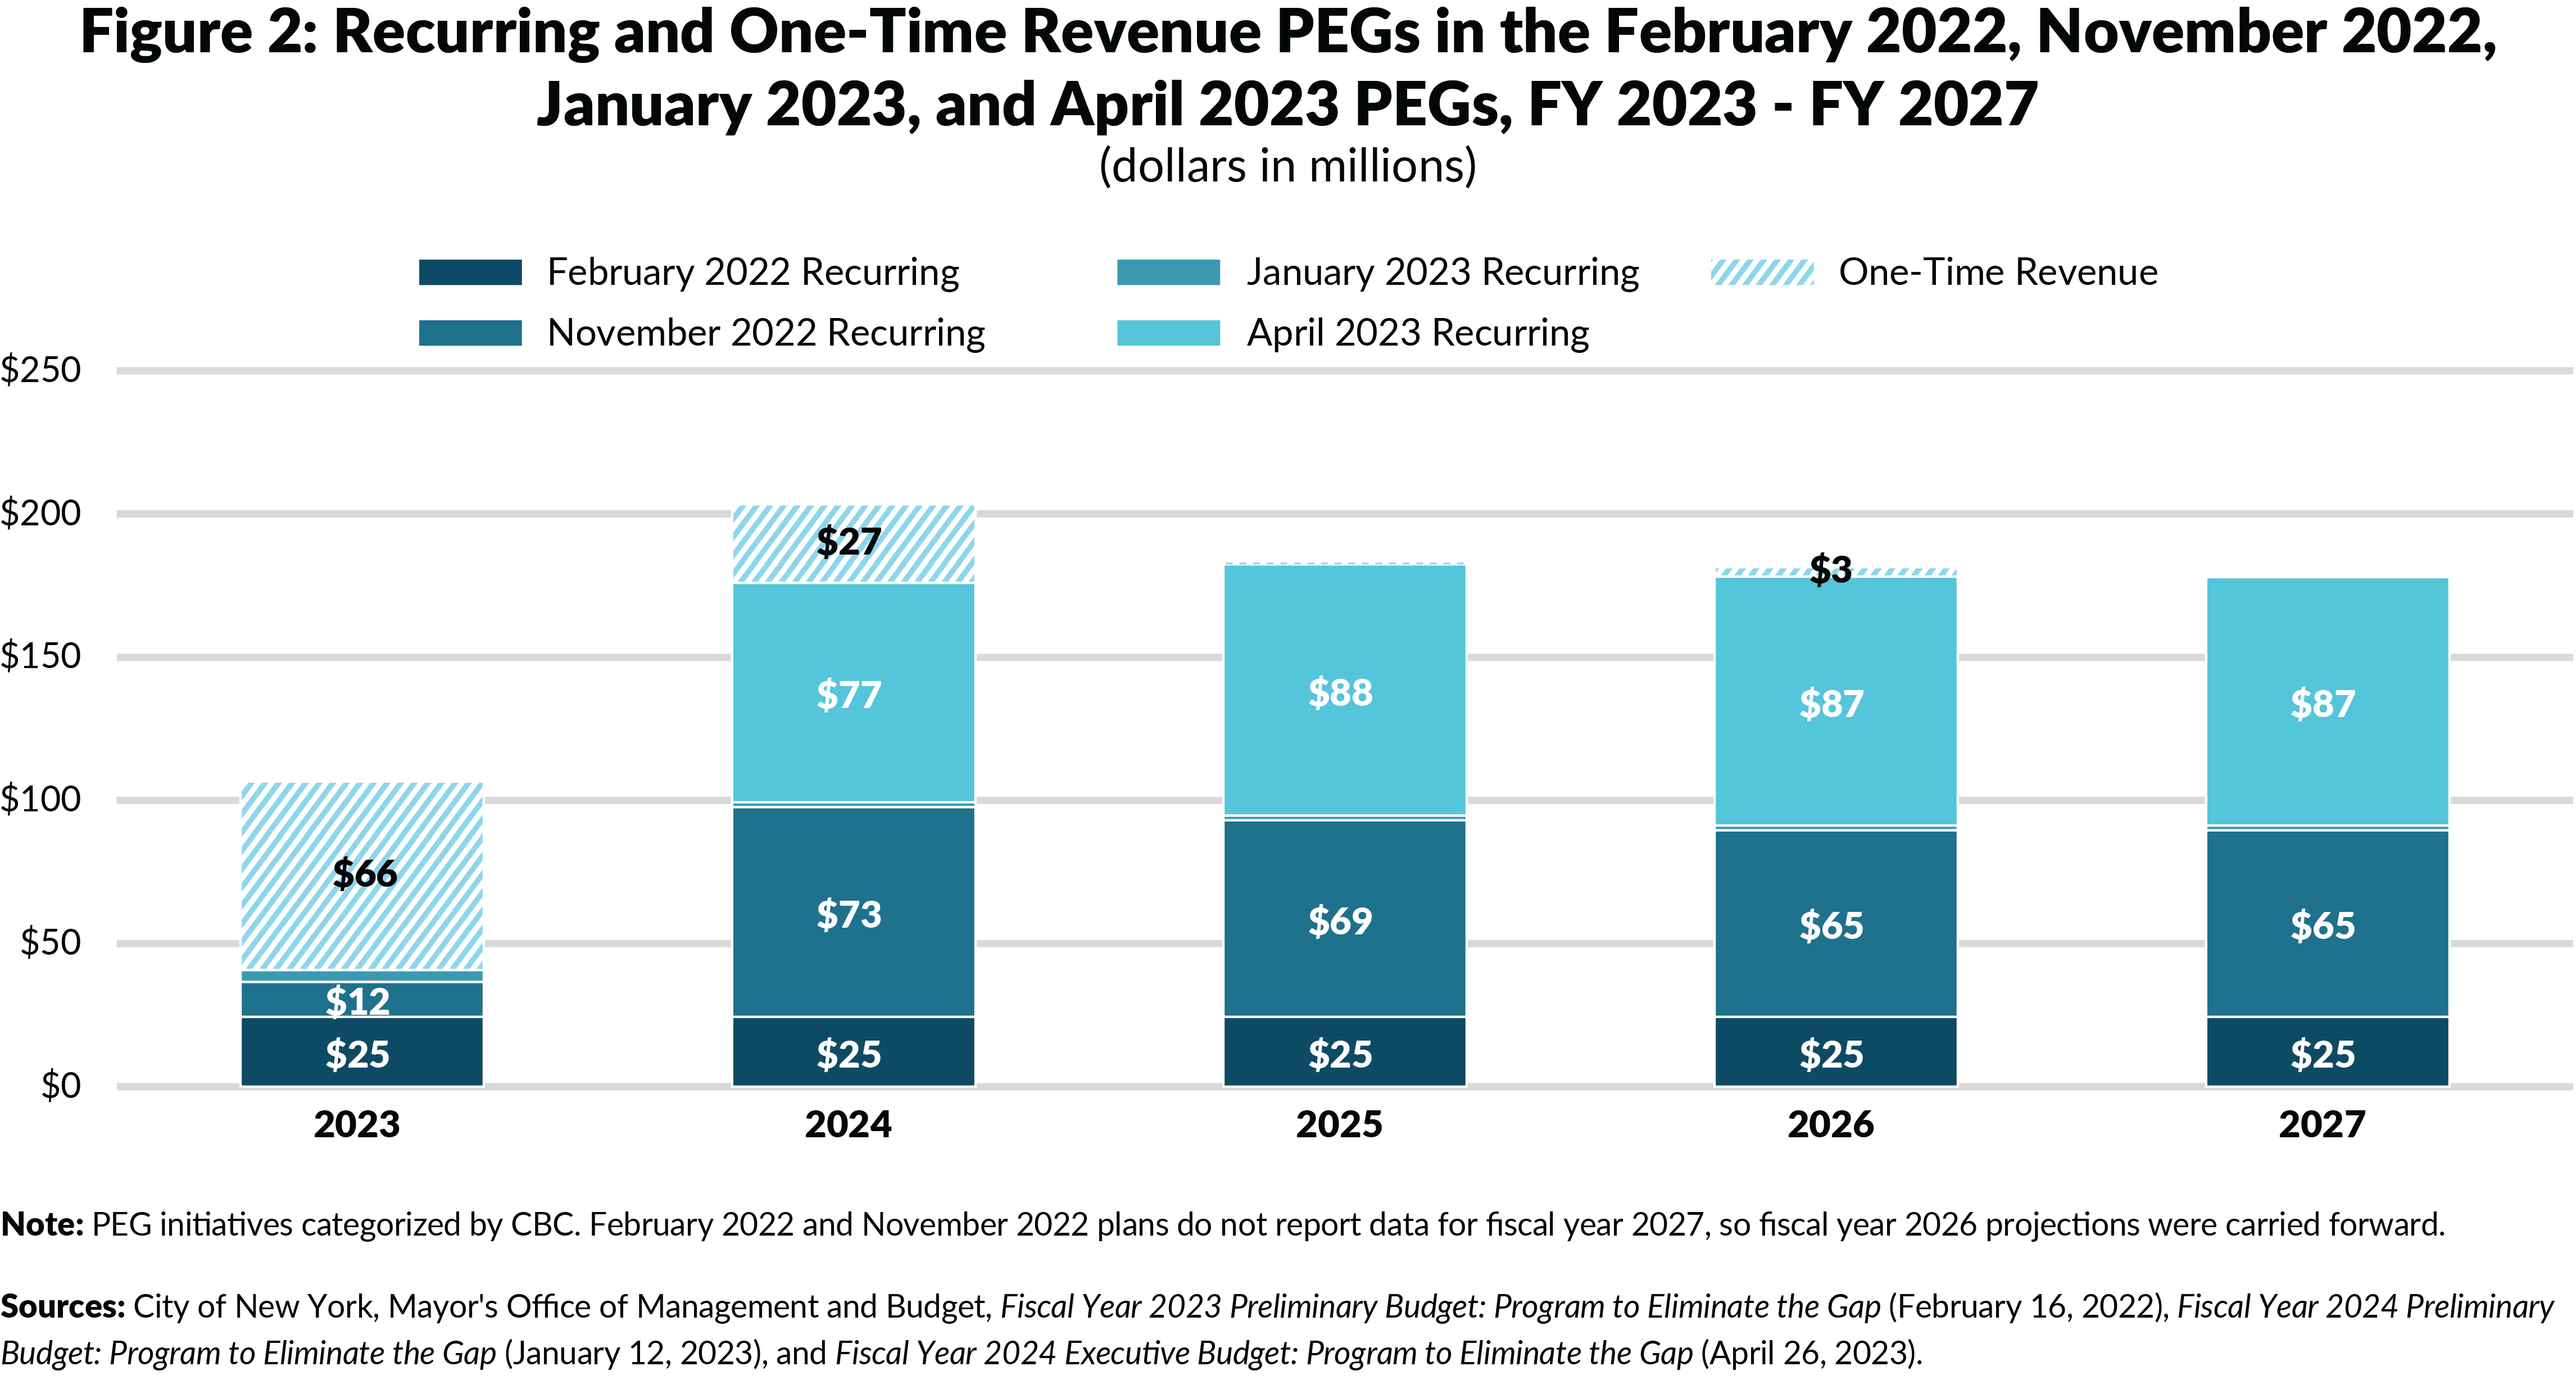 Figure 2: Recurring and One-Time Revenue PEGs in the February 2022, November 2022,January 2023, and April 2023 PEGs (dollars in millions)